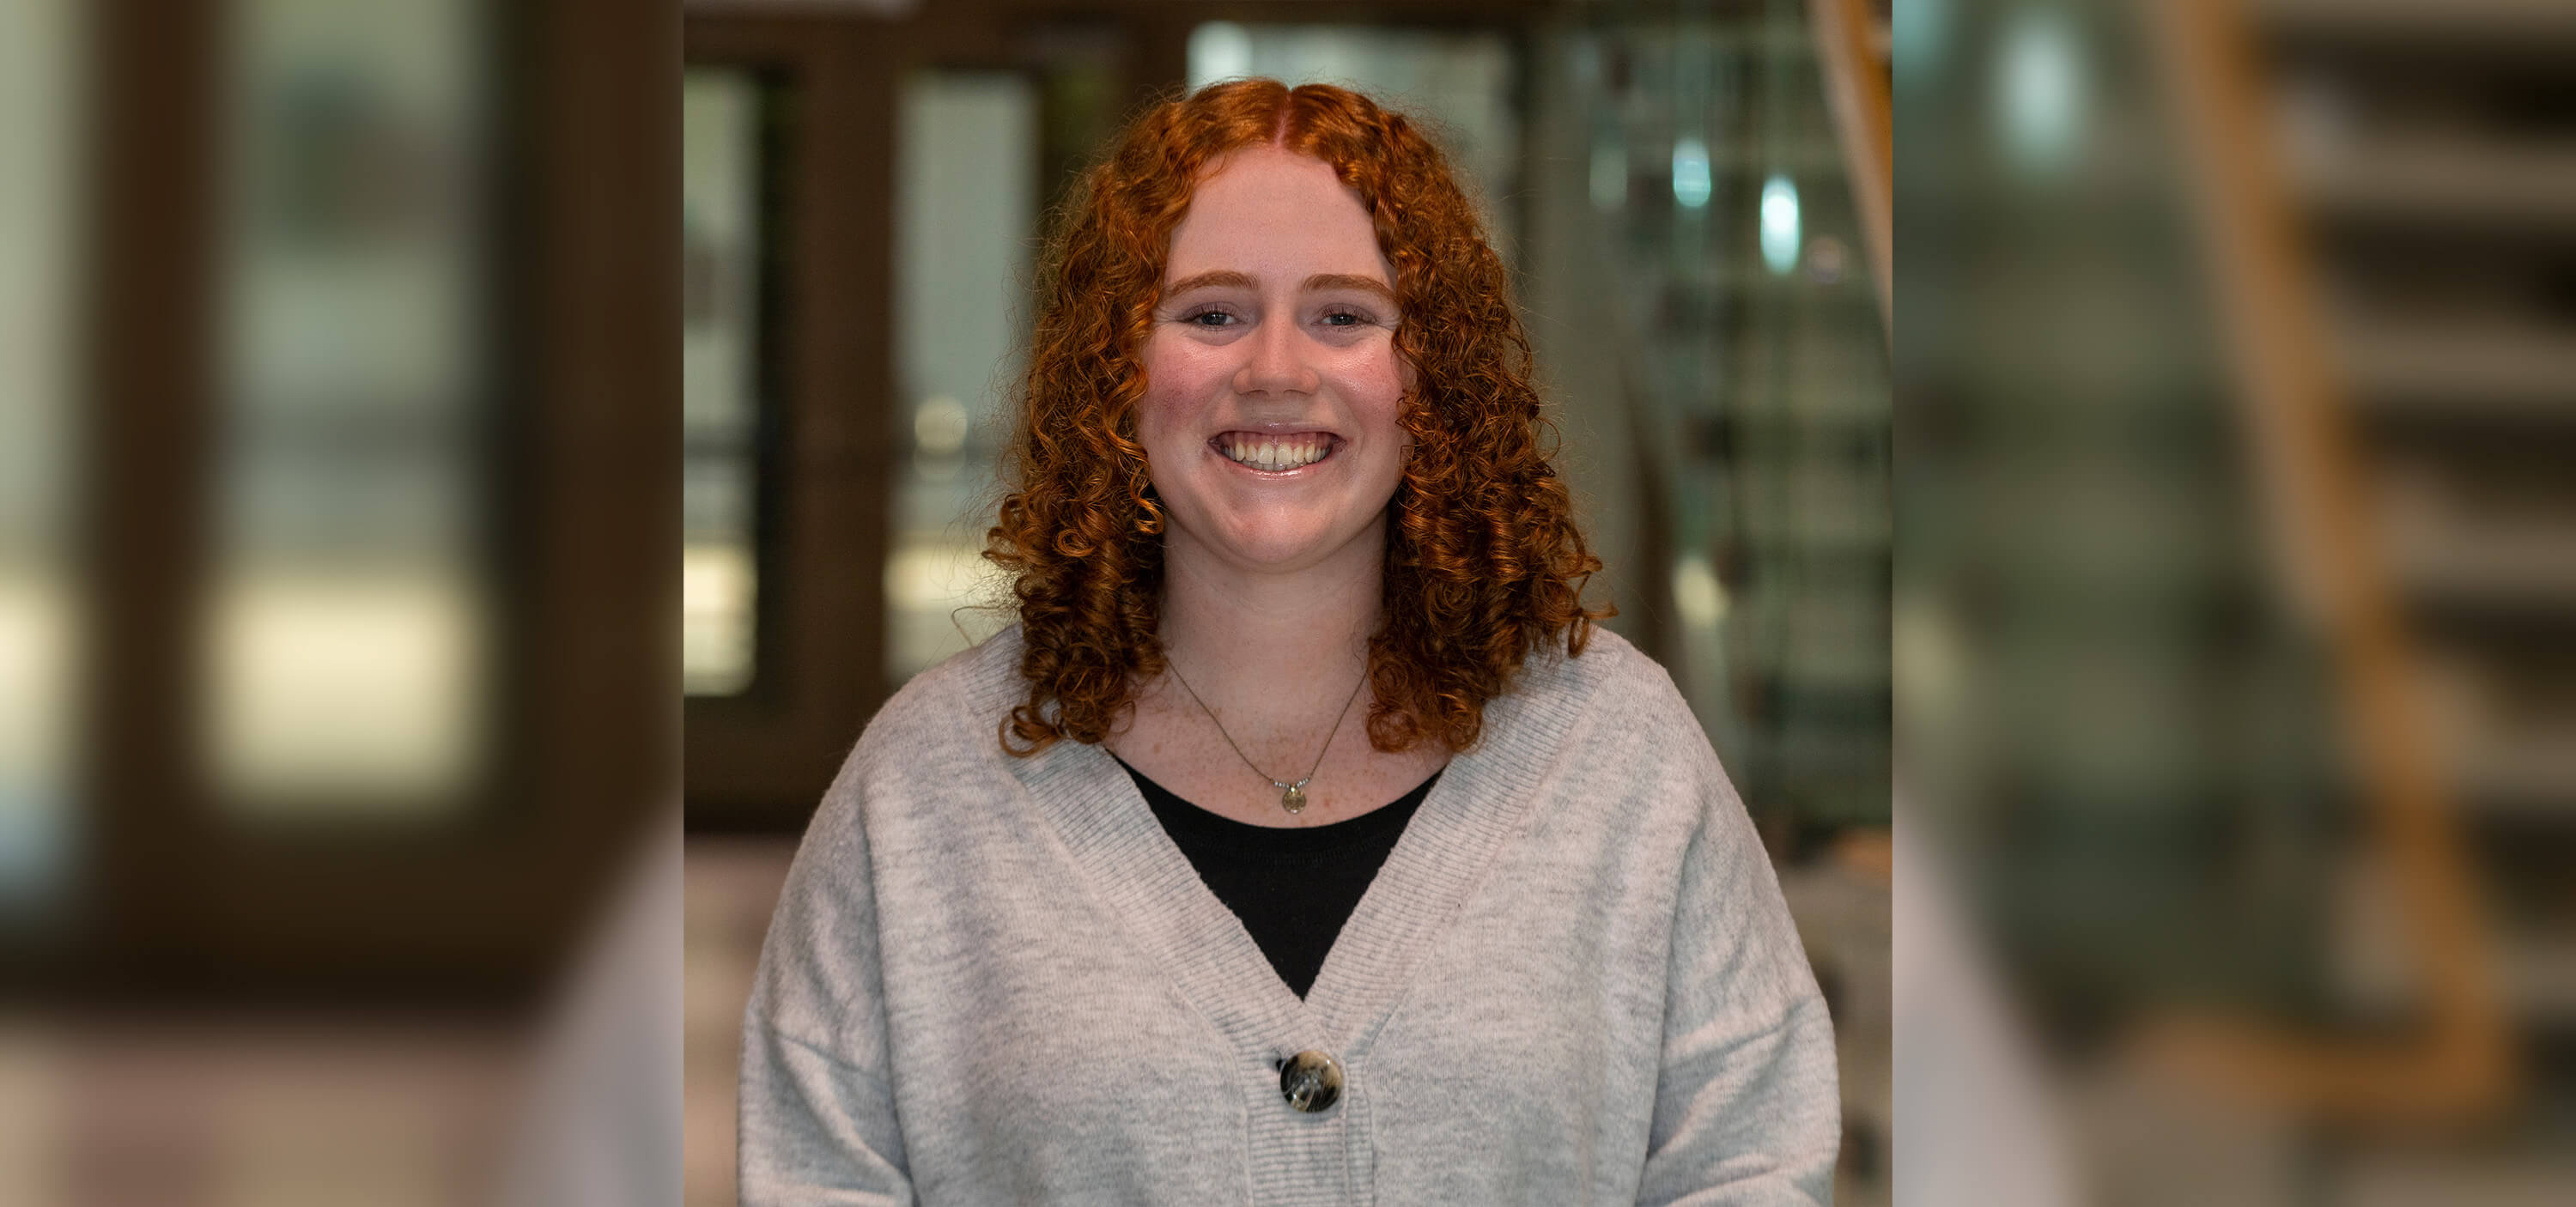 Female student with curly red hair wearing a grey cardigan over a black top smiles for a headshot.